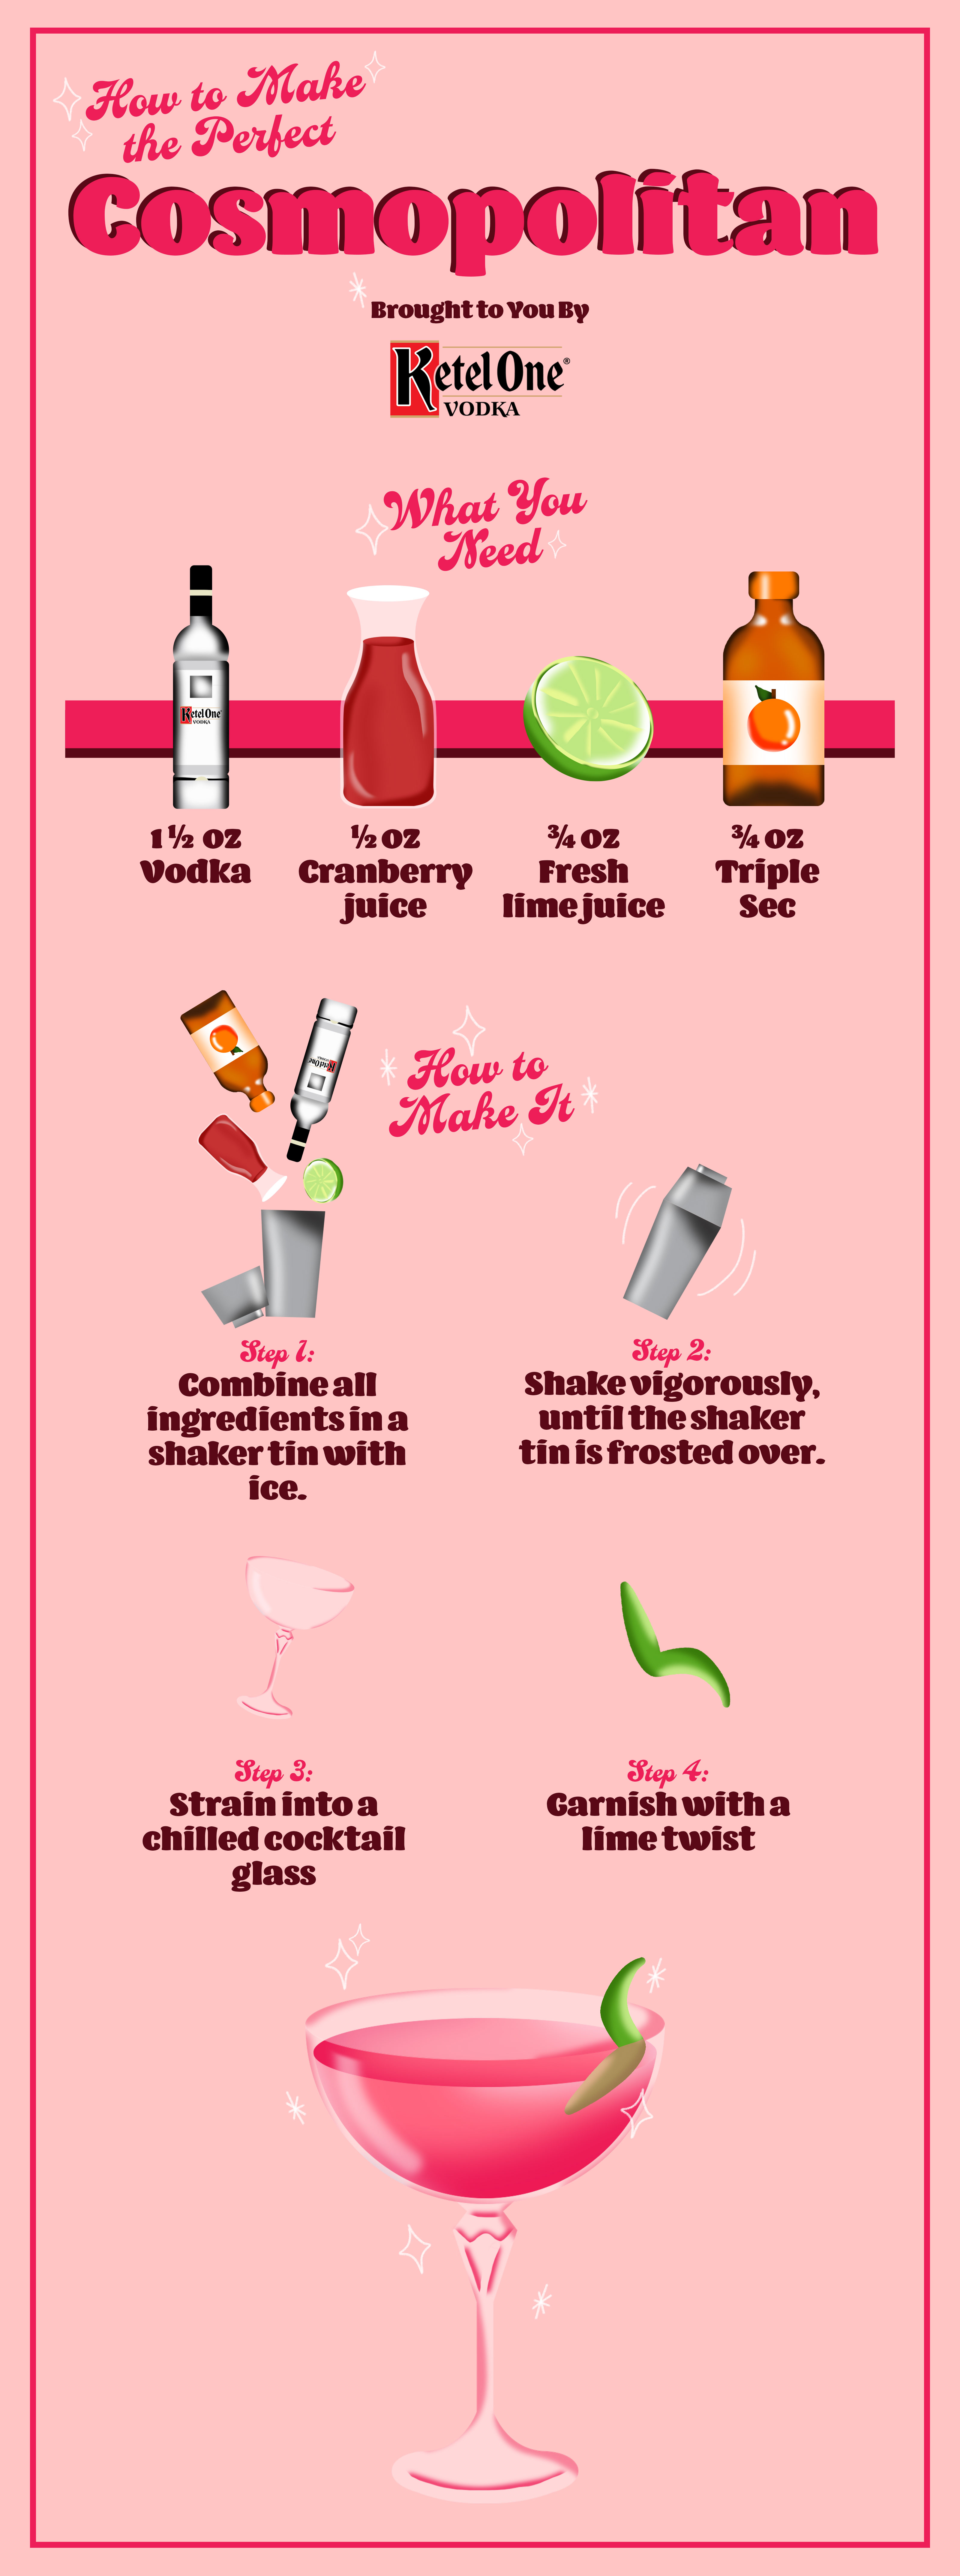 How to Make the Best Cosmopolitan [Infographic]  VinePair